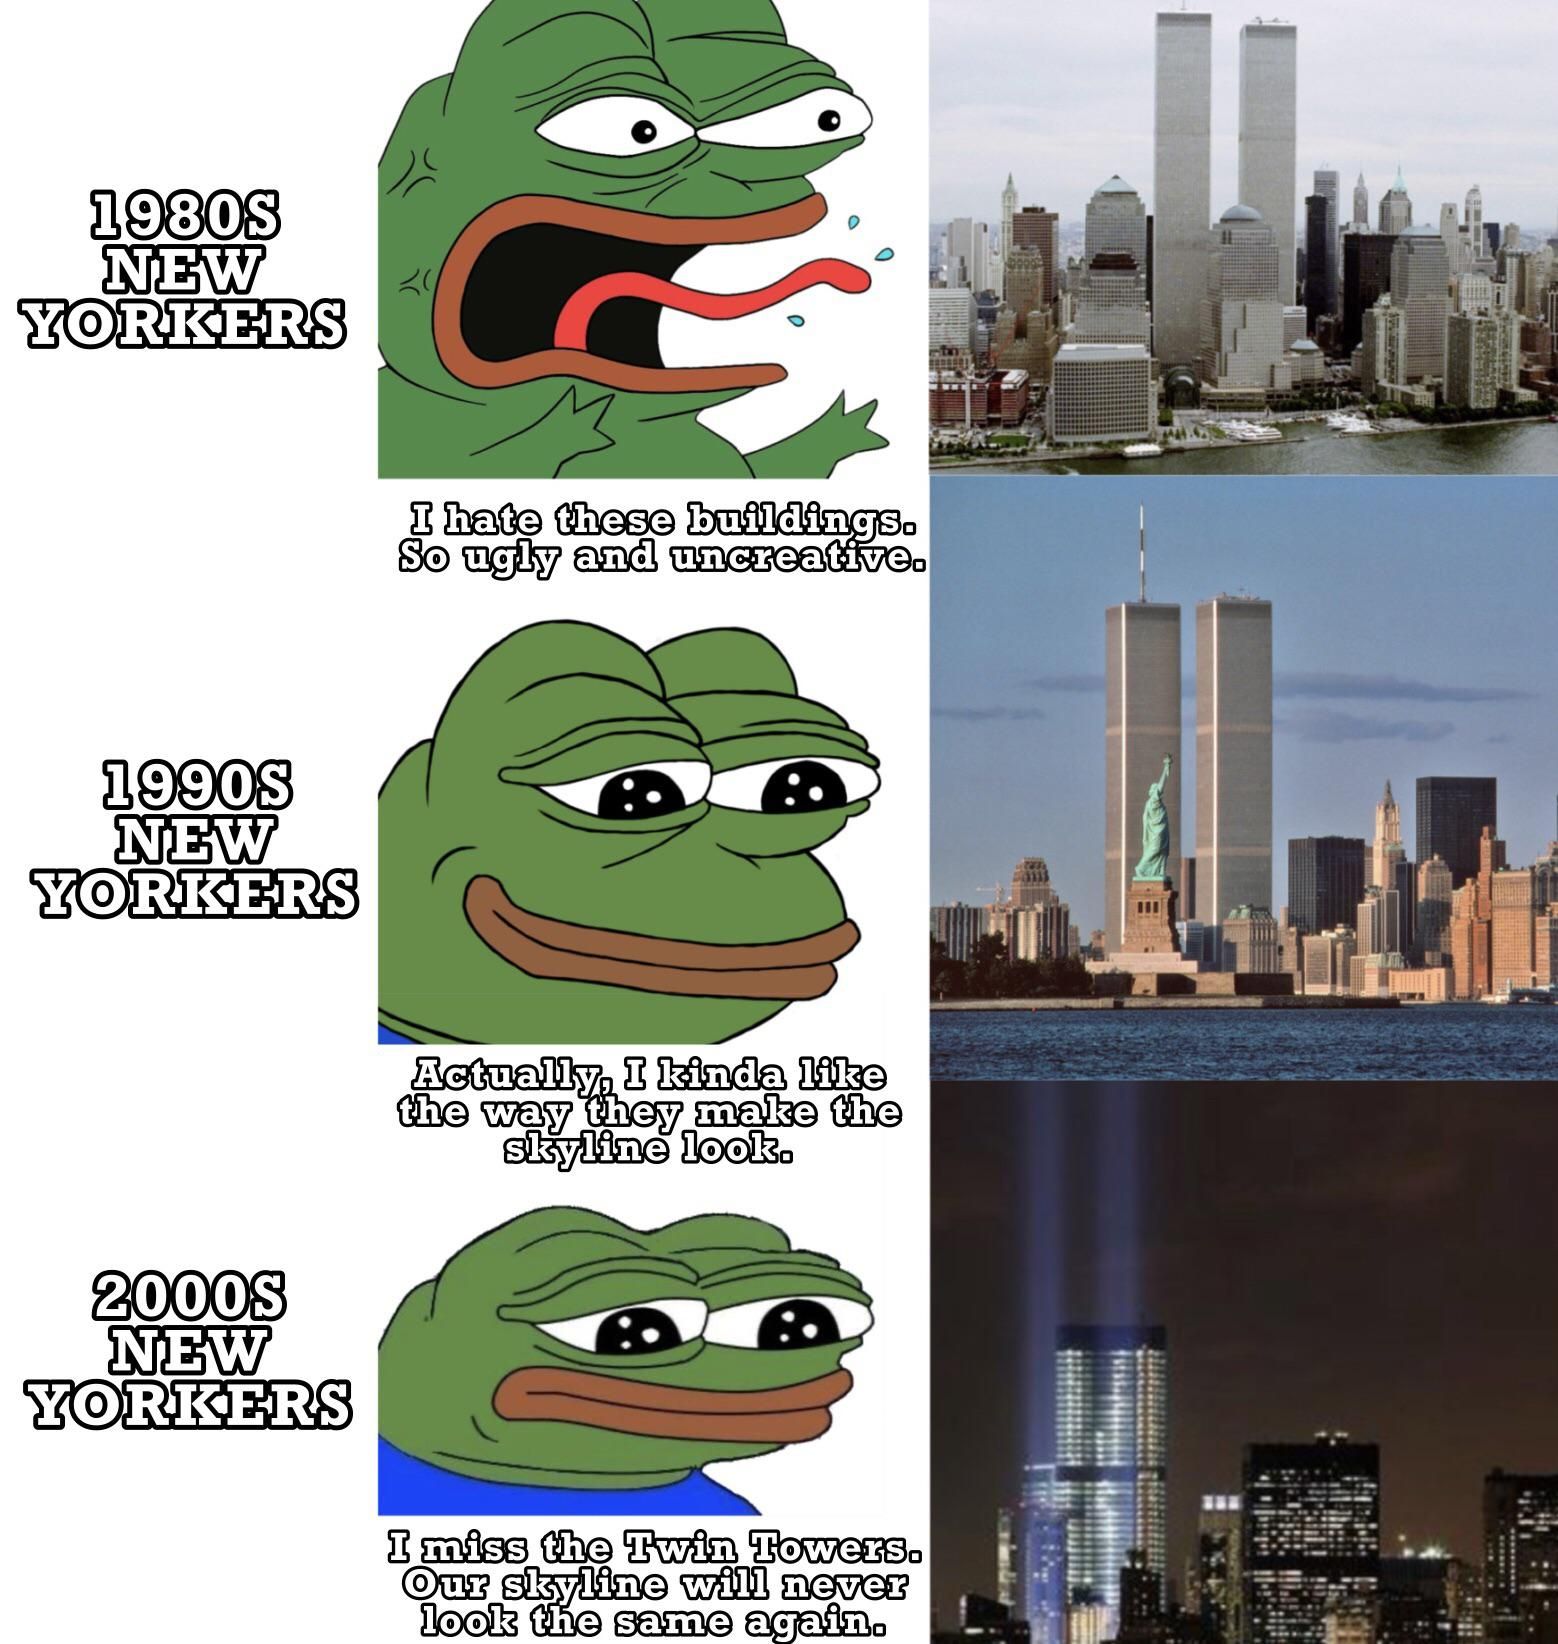 Public perception towards the WTC throughout the decades.